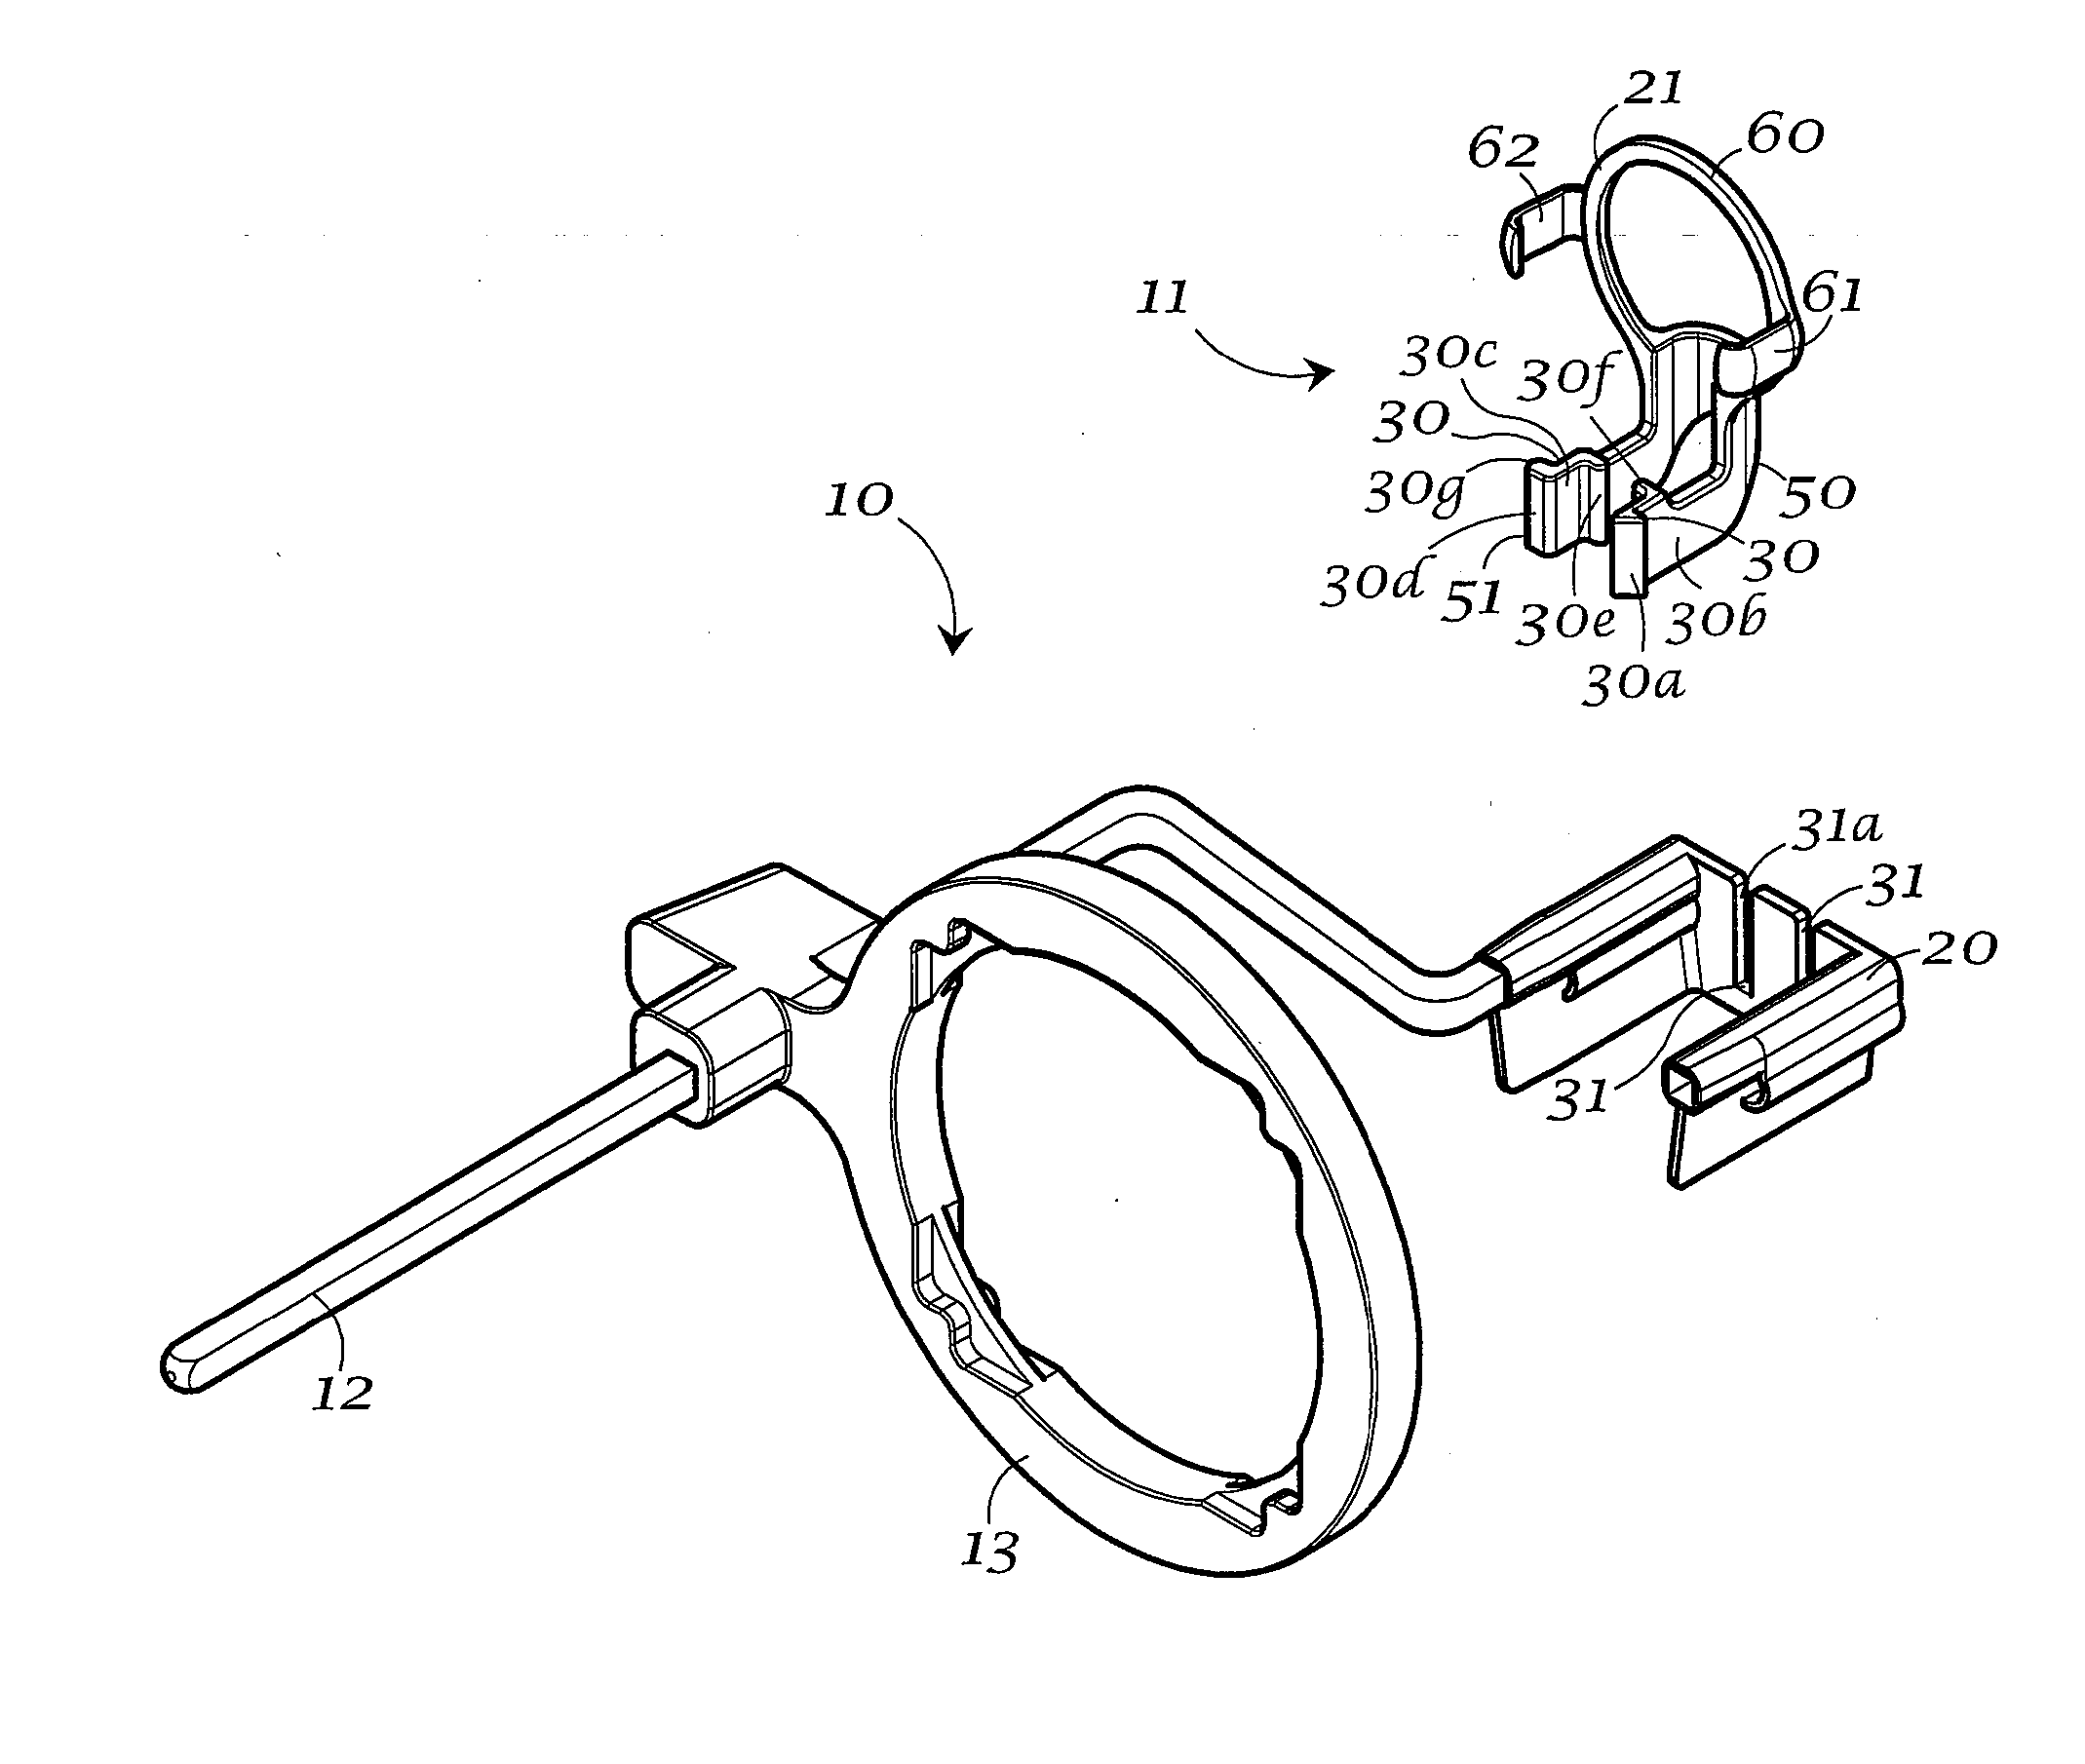 Positioning apparatus for dental x-ray procedures